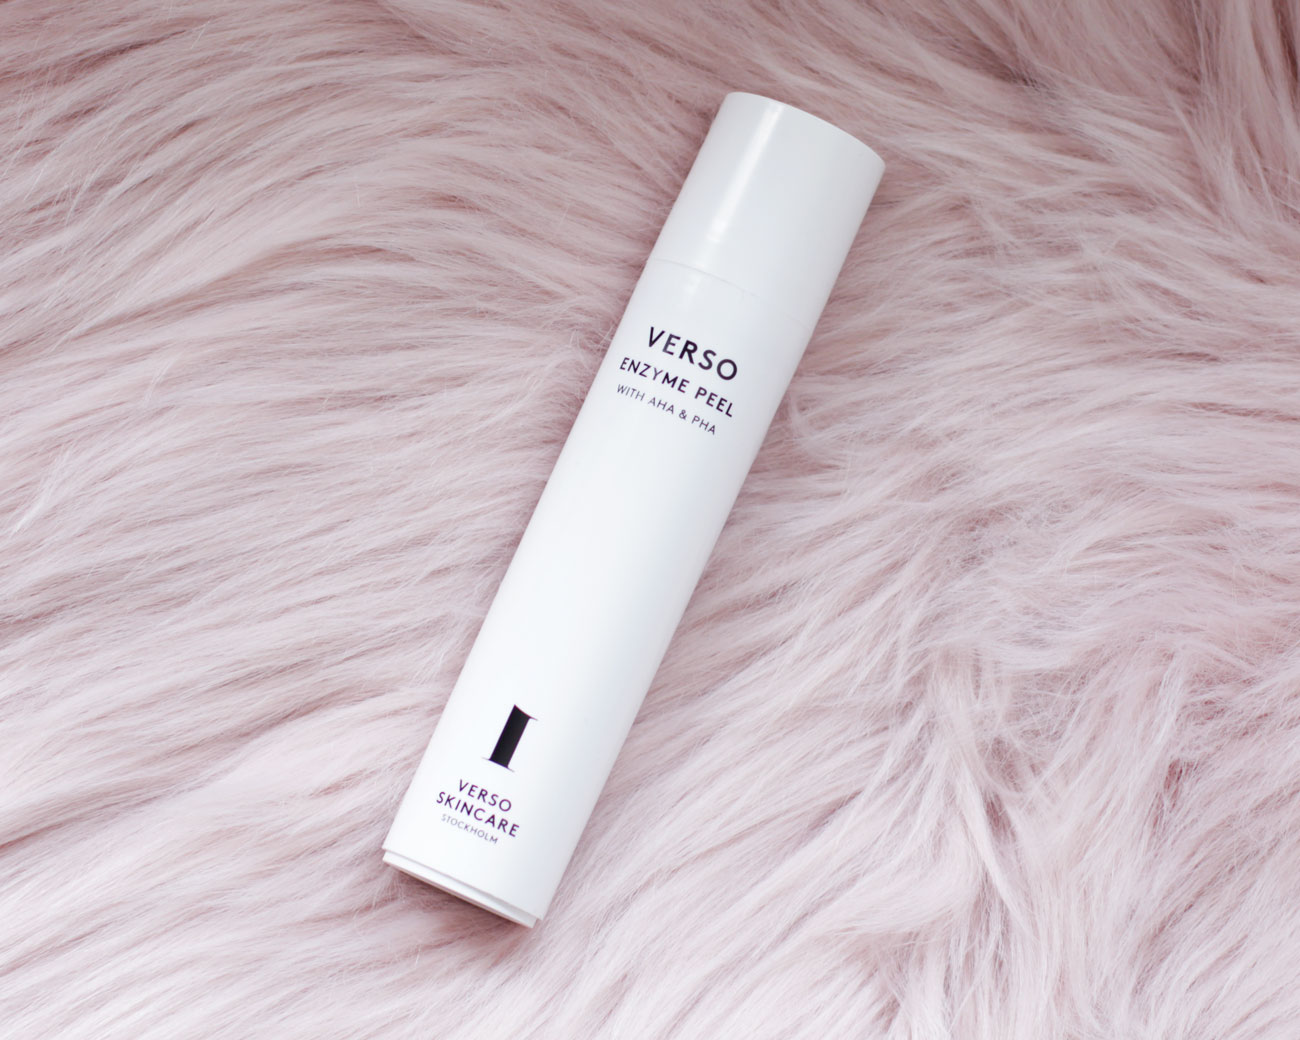 Verso Enzyme Peel with AHA and PHA